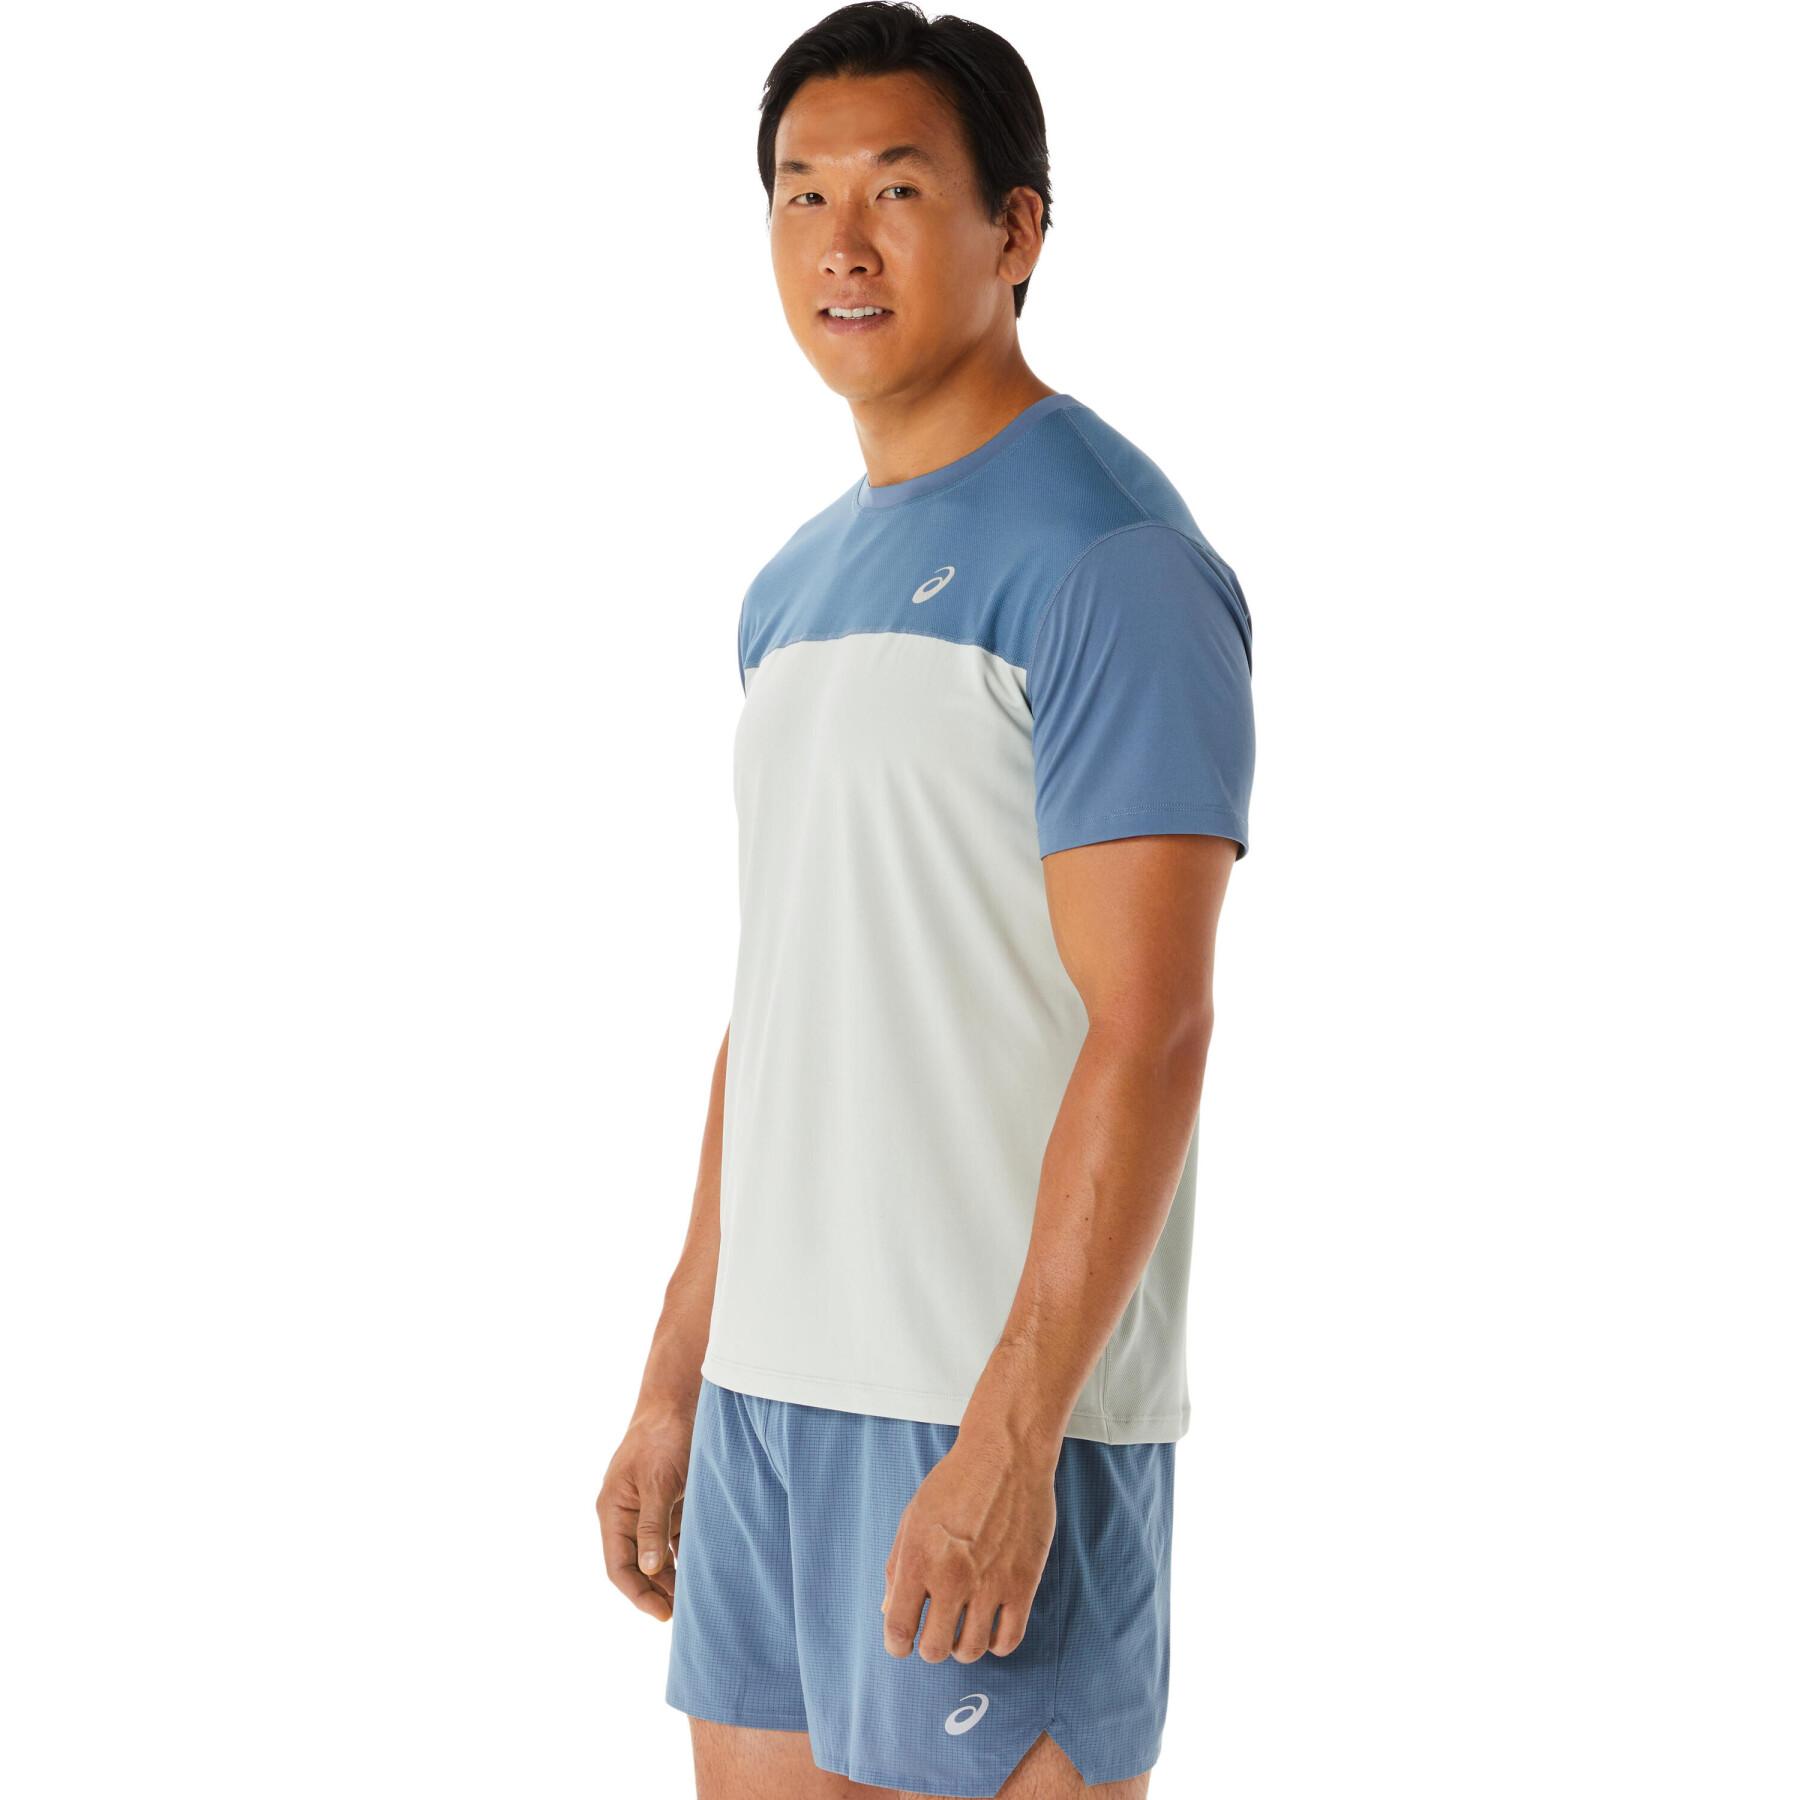 2-in-1 shorts Asics Core